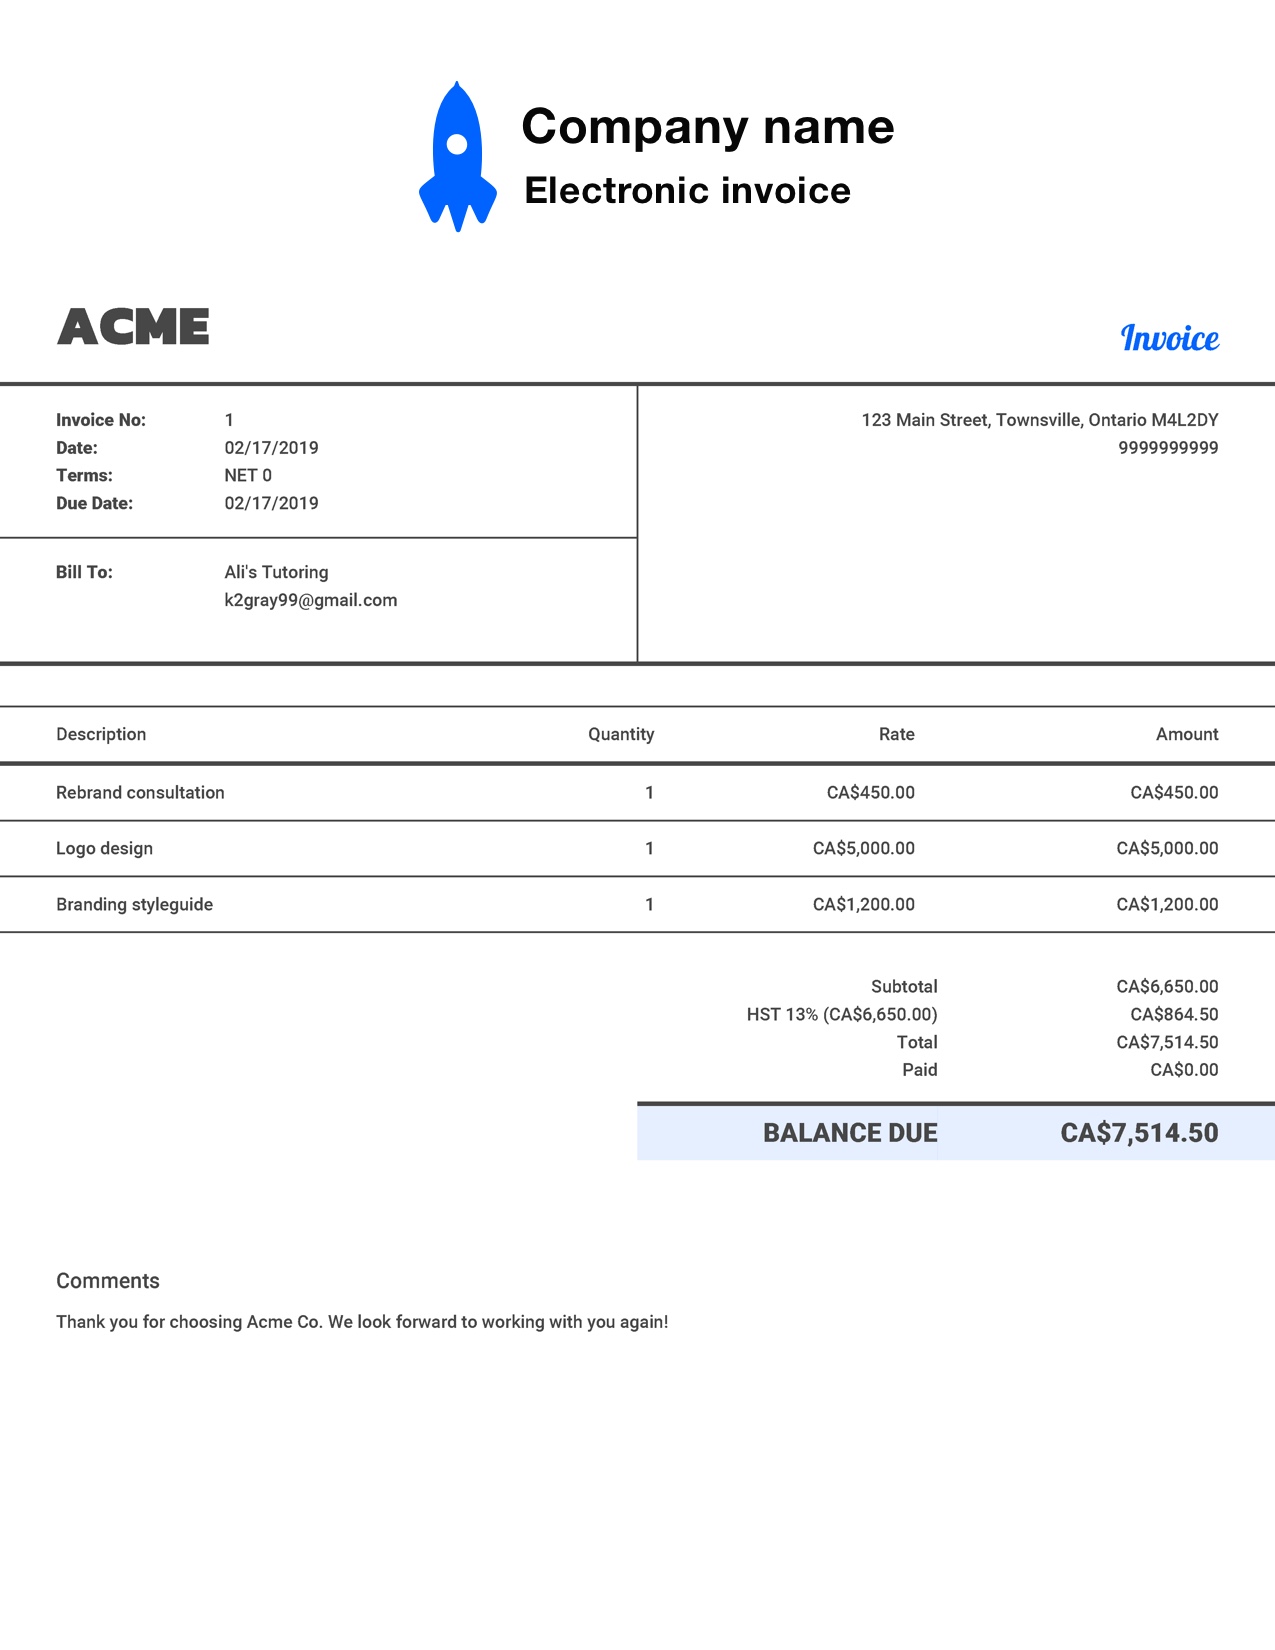 Free Electronic Invoice Template. Customize and Send in 90 Seconds